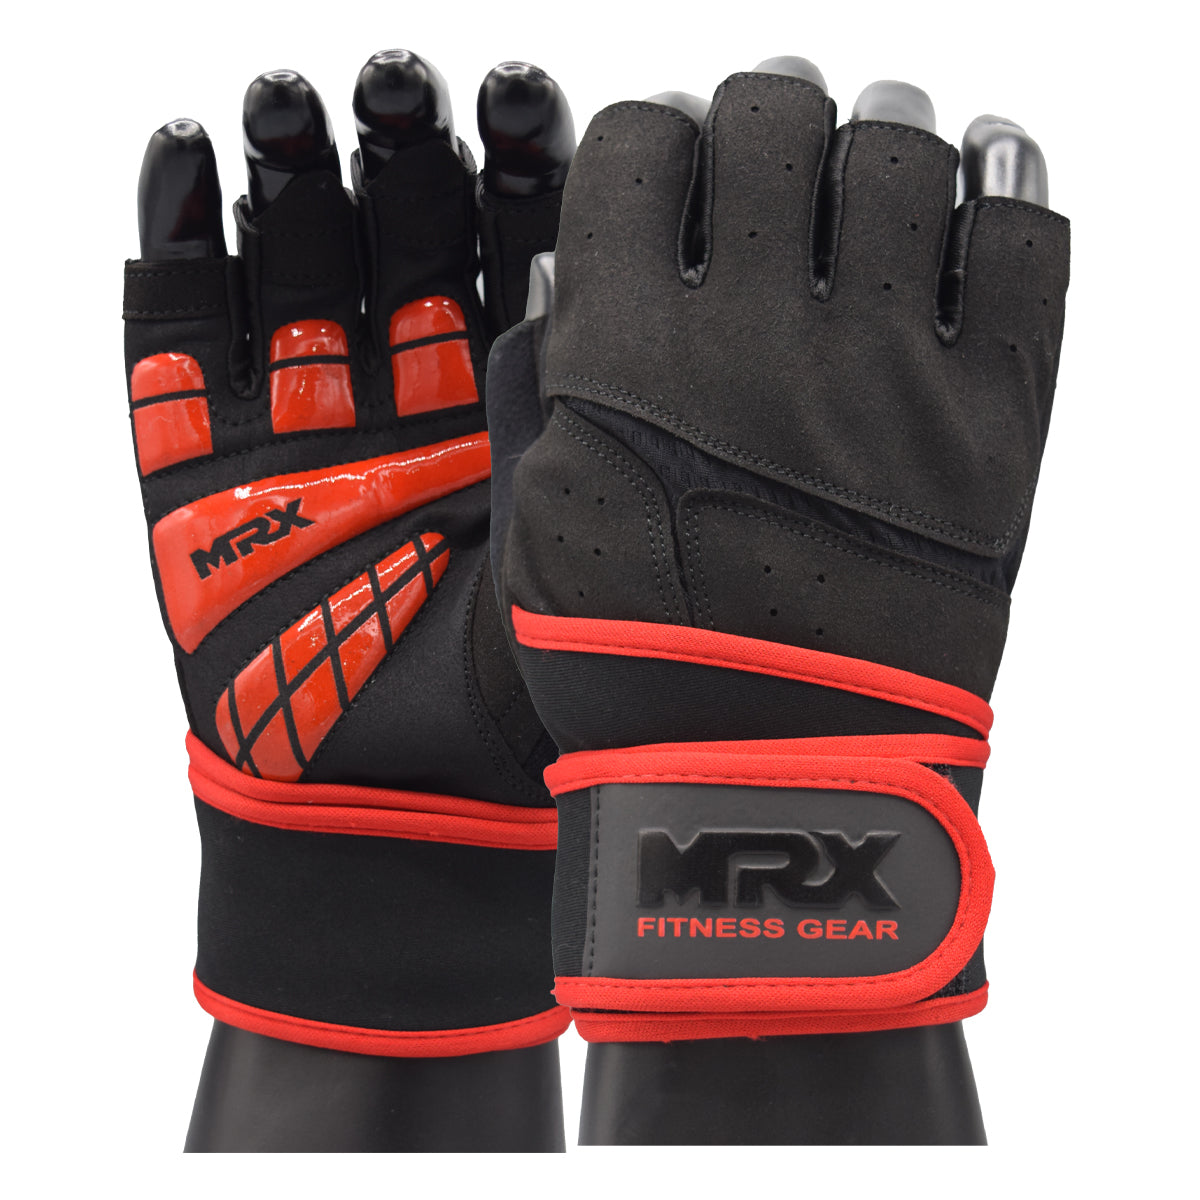 MRX Weightlifting Gloves for GYM Workout Training Long Wrist Strap